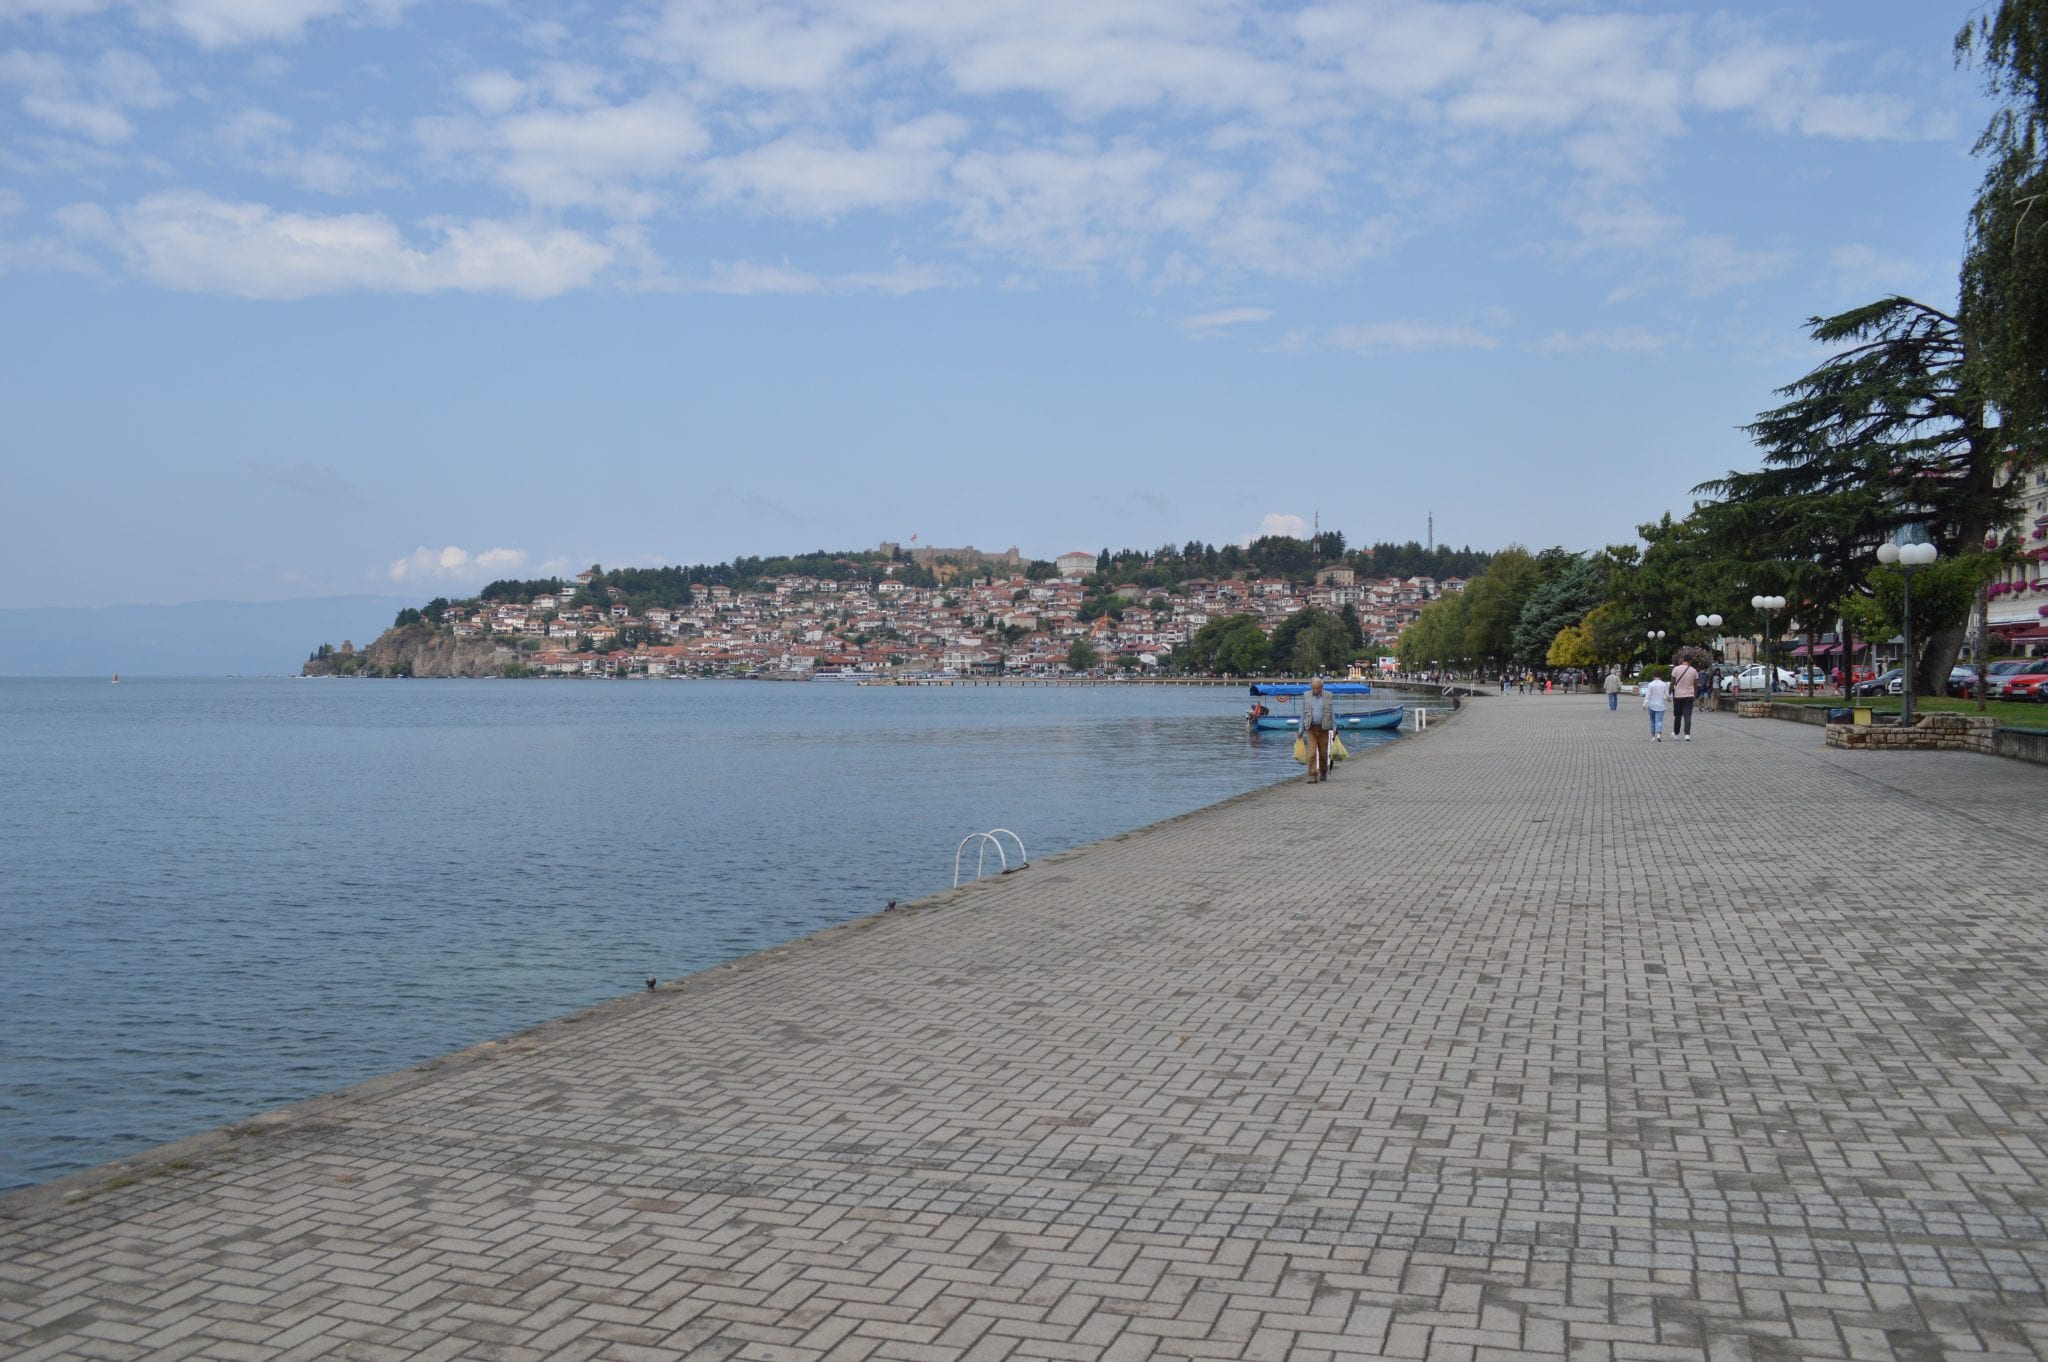 Lake Ohrid – What has changed in 2 years?